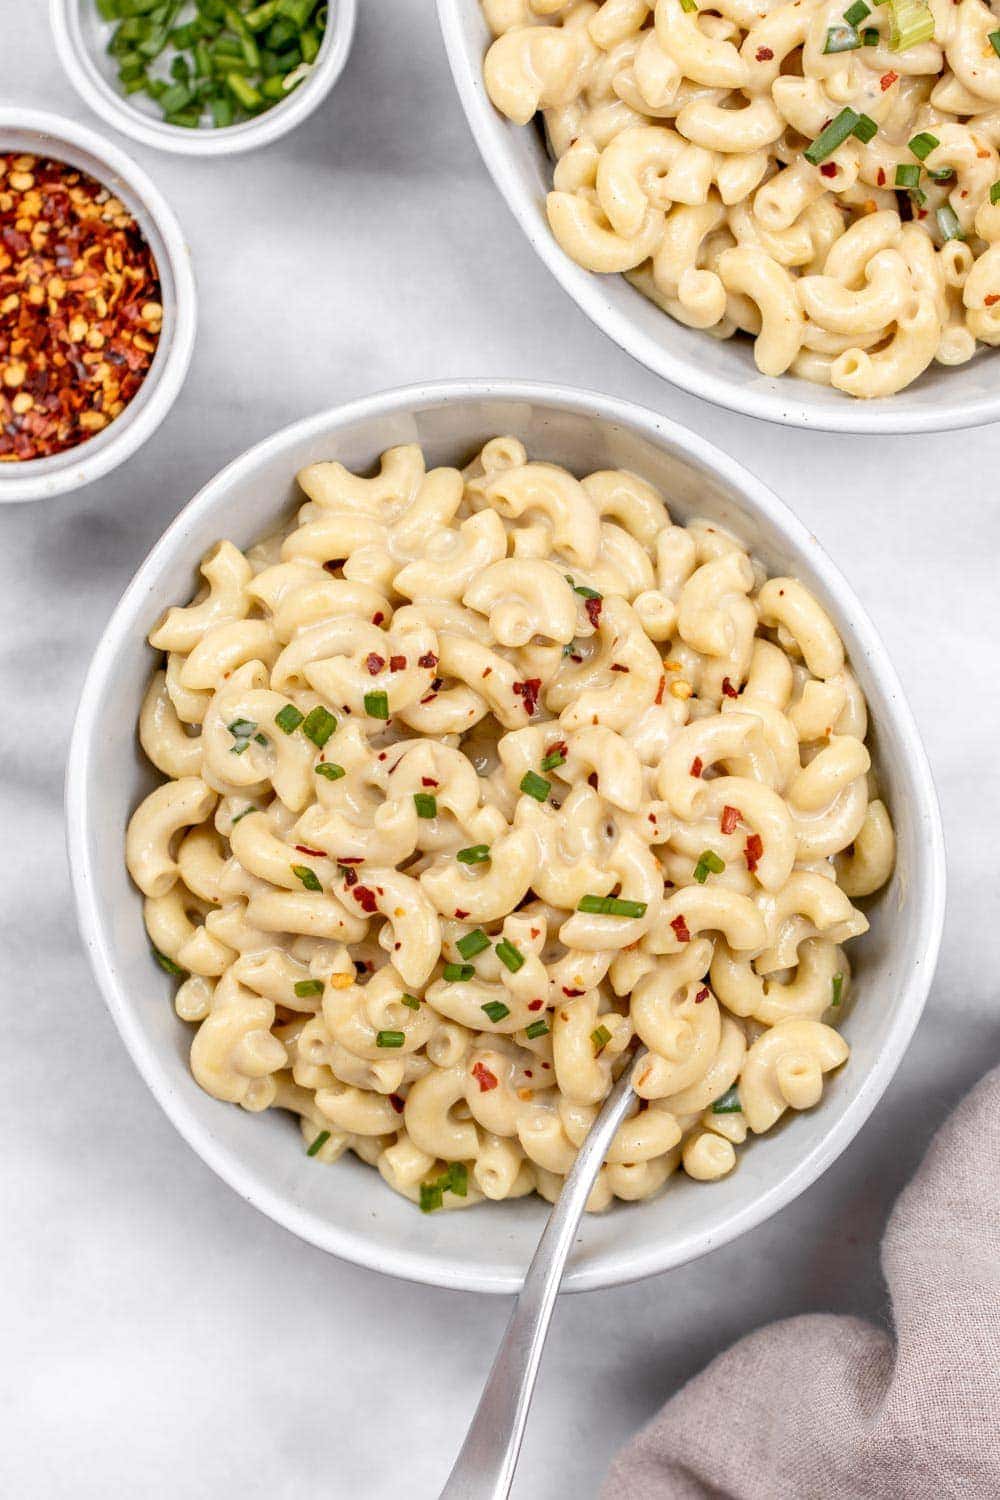 Roasted garlic dairy free mac and cheese in a bowl.